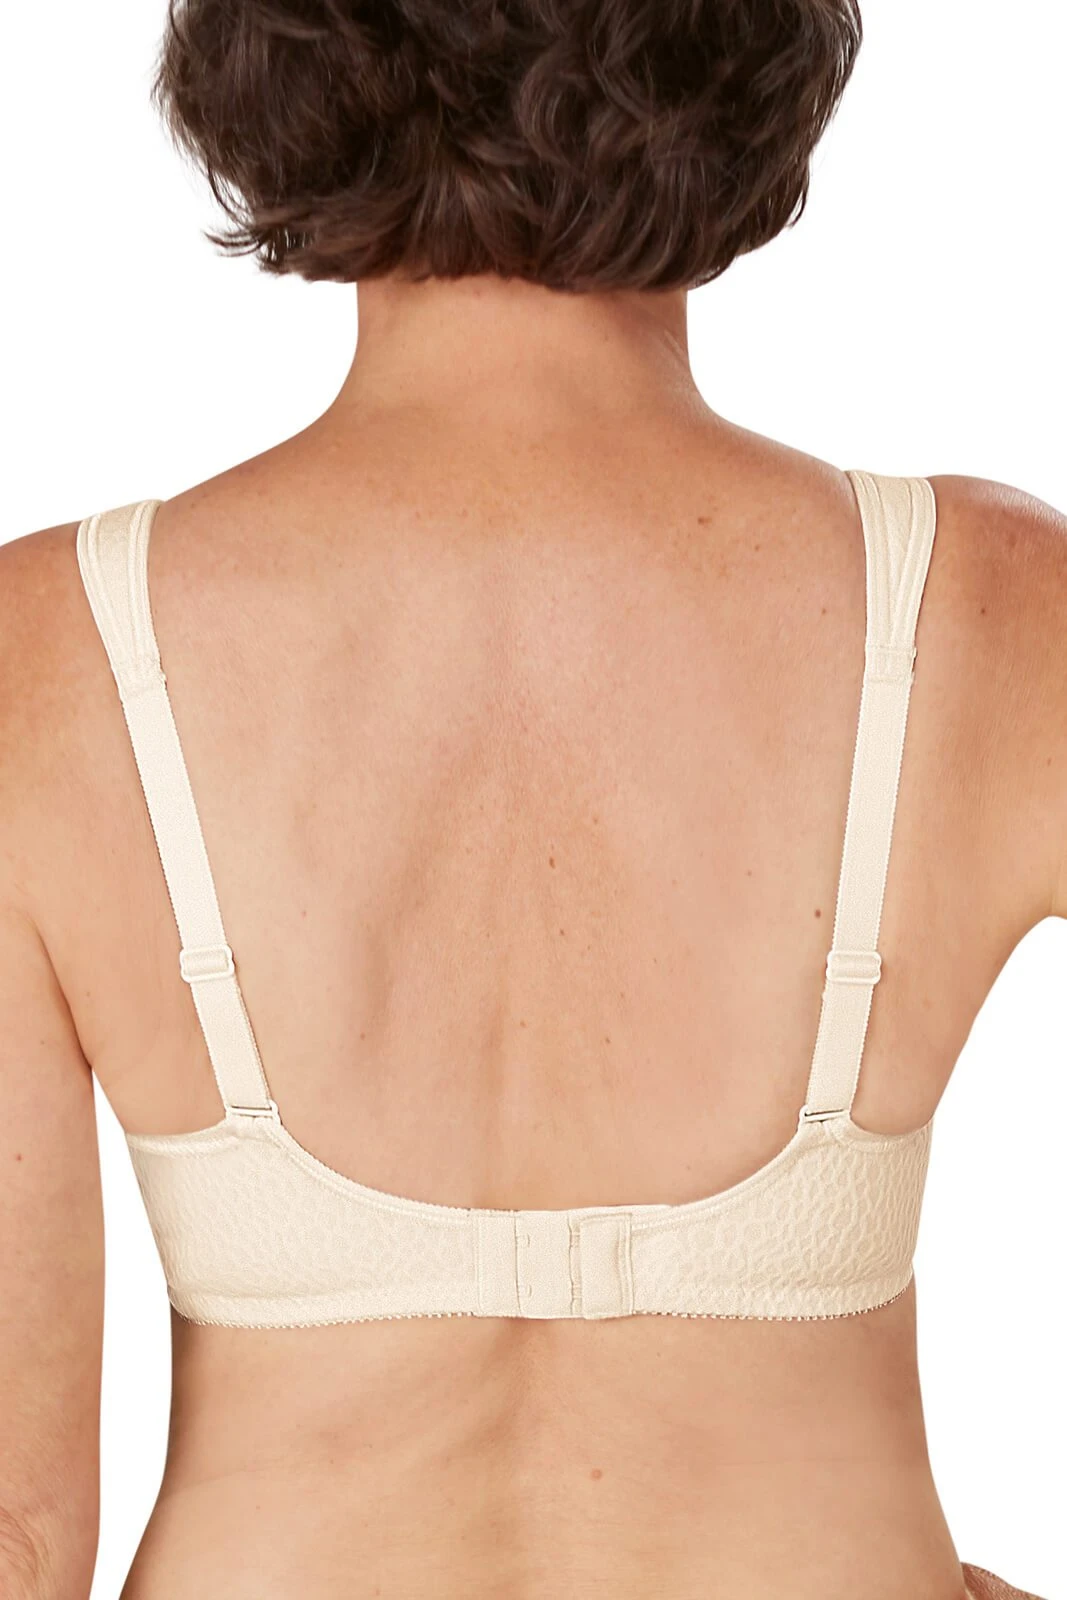 Amoena Kylie Padded Non-wired Bra - Off-White - SEASONAL - Select  sizes/quantities available